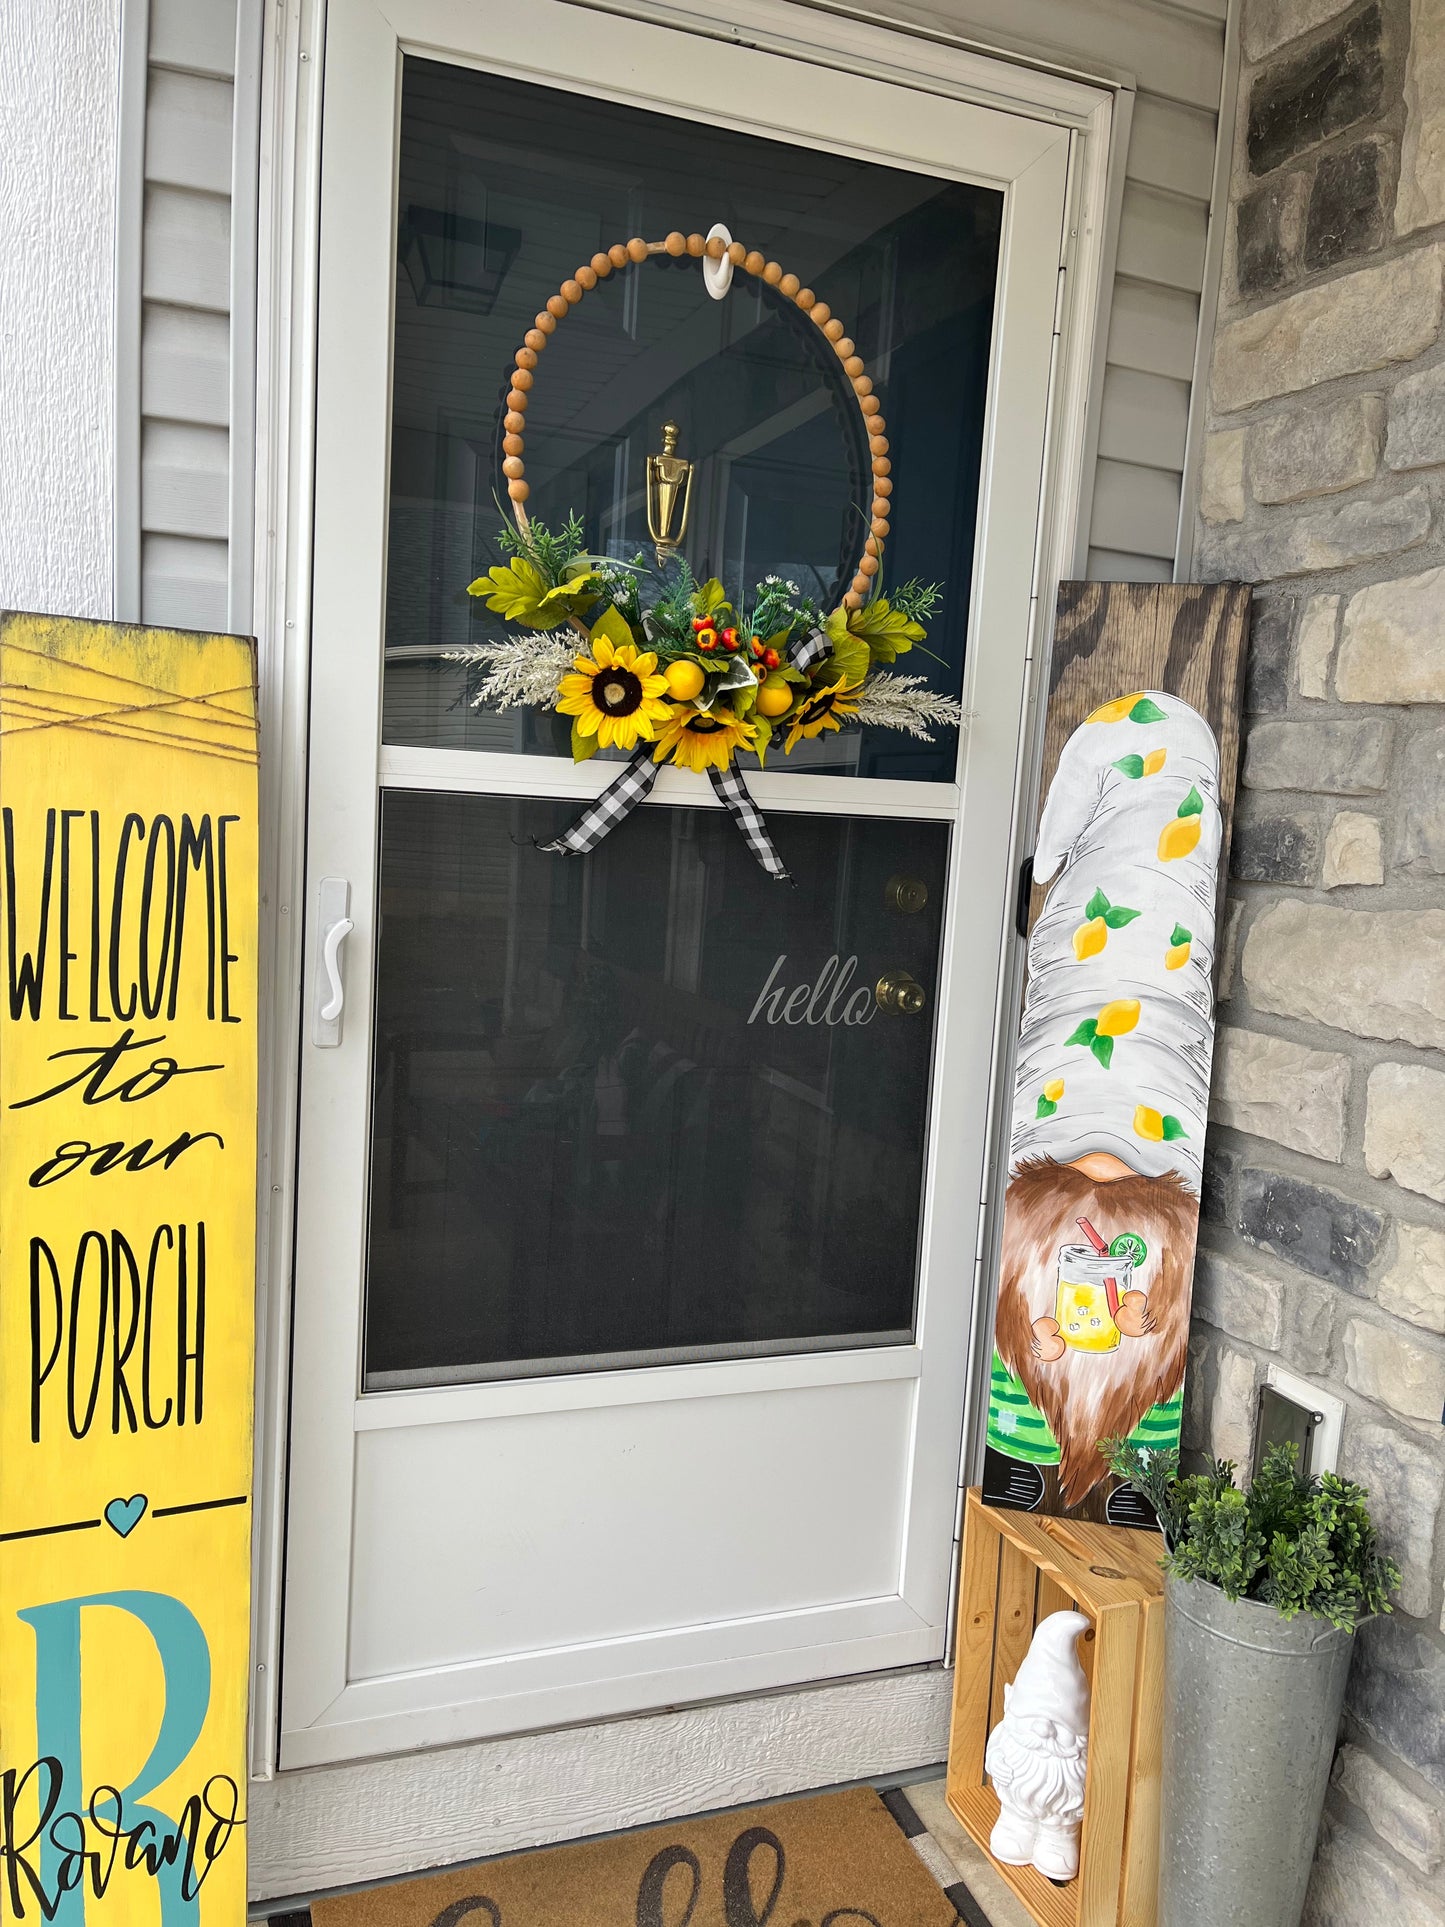 Lemon hat Gnome welcome sign.Welcome sign garden gnome